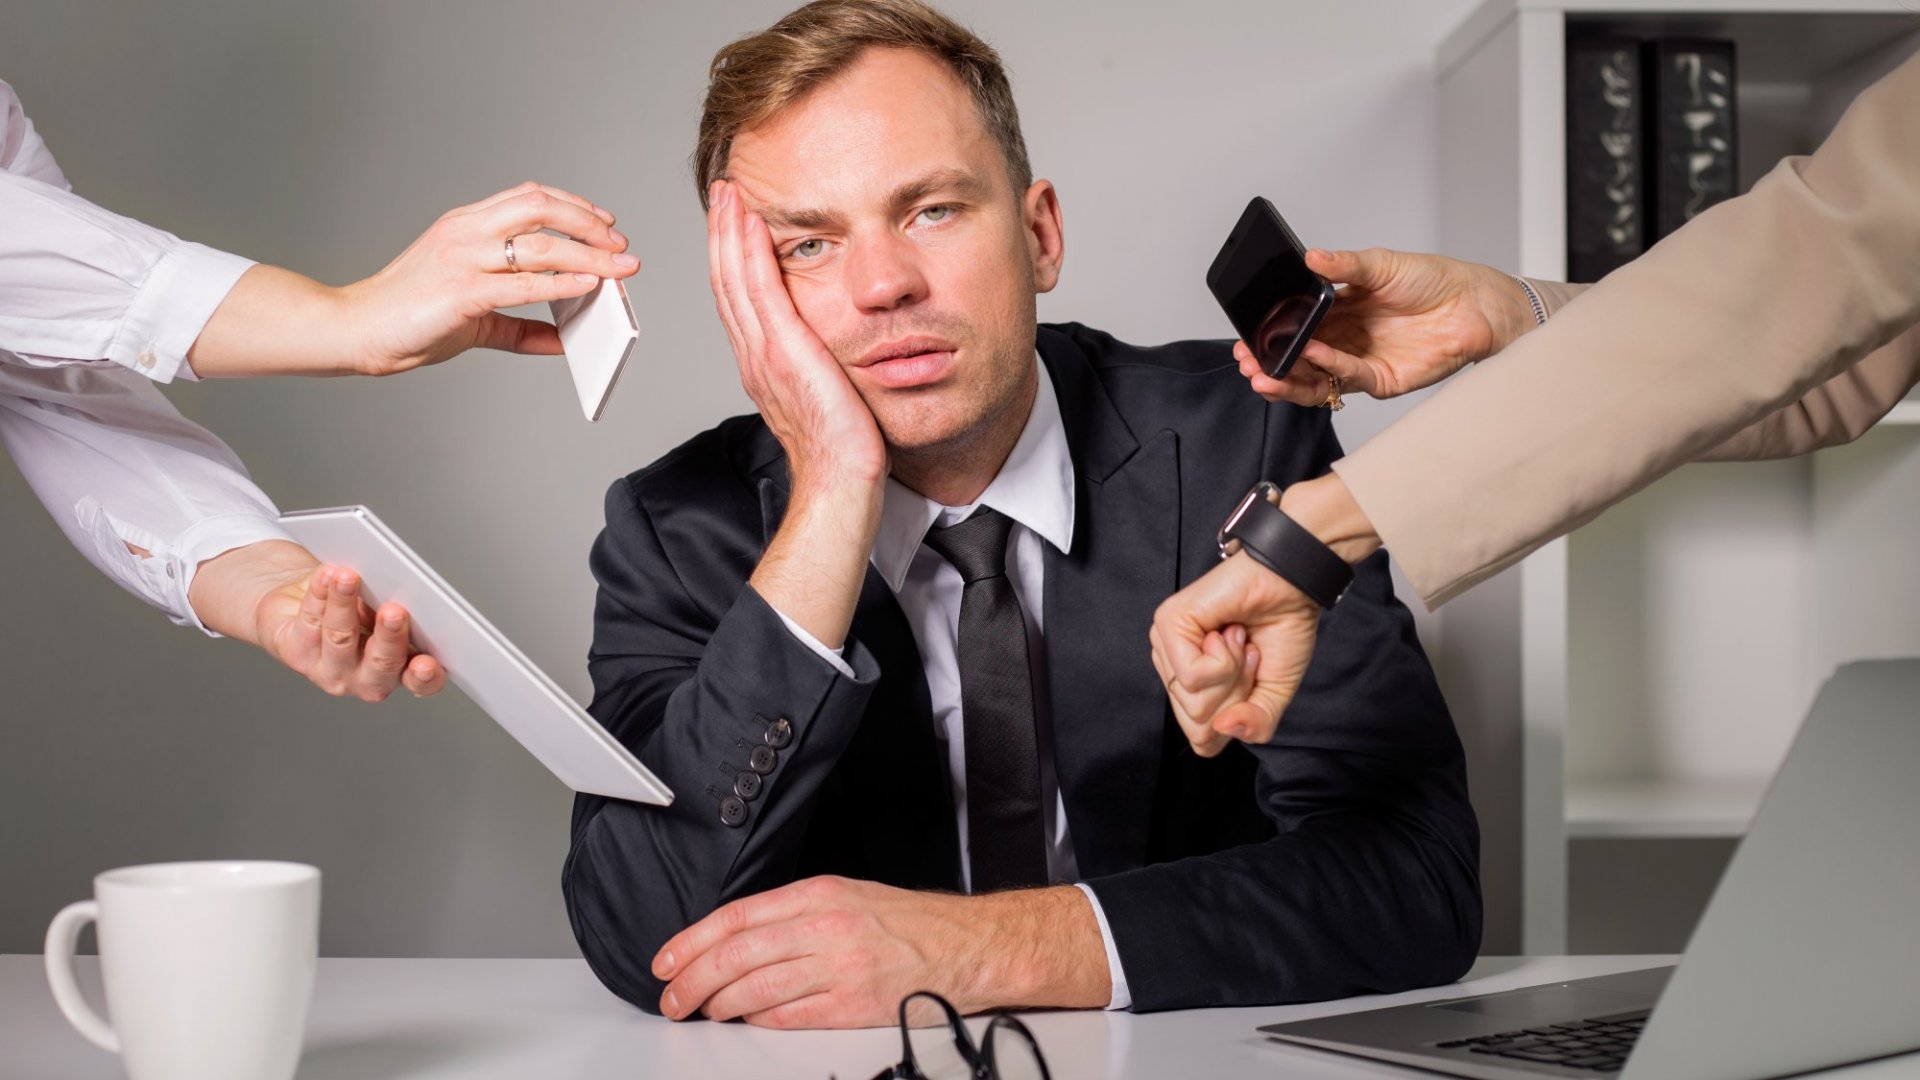 manage work related stress absences